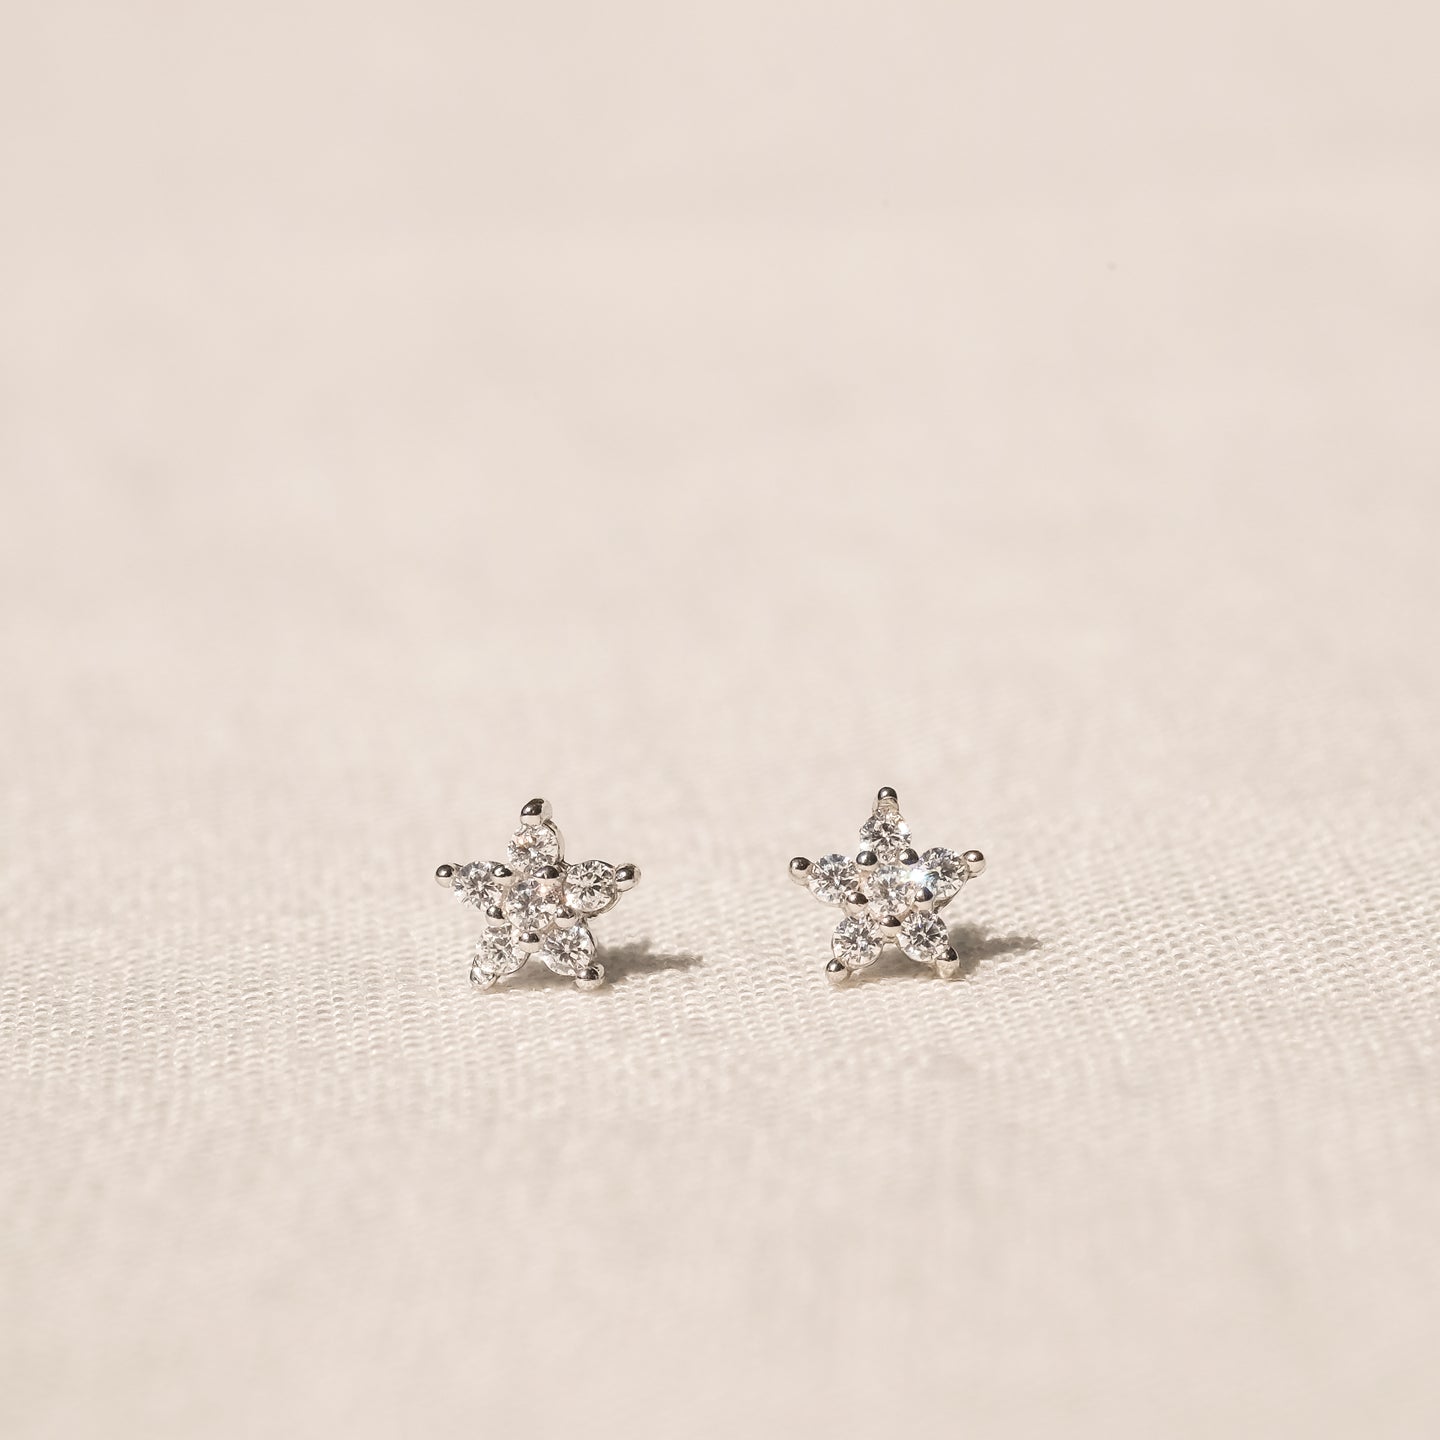 products/flo-925-sterling-silver-cz-studs-1_06857d73-650b-4b49-a911-941c2dce55a6.jpg